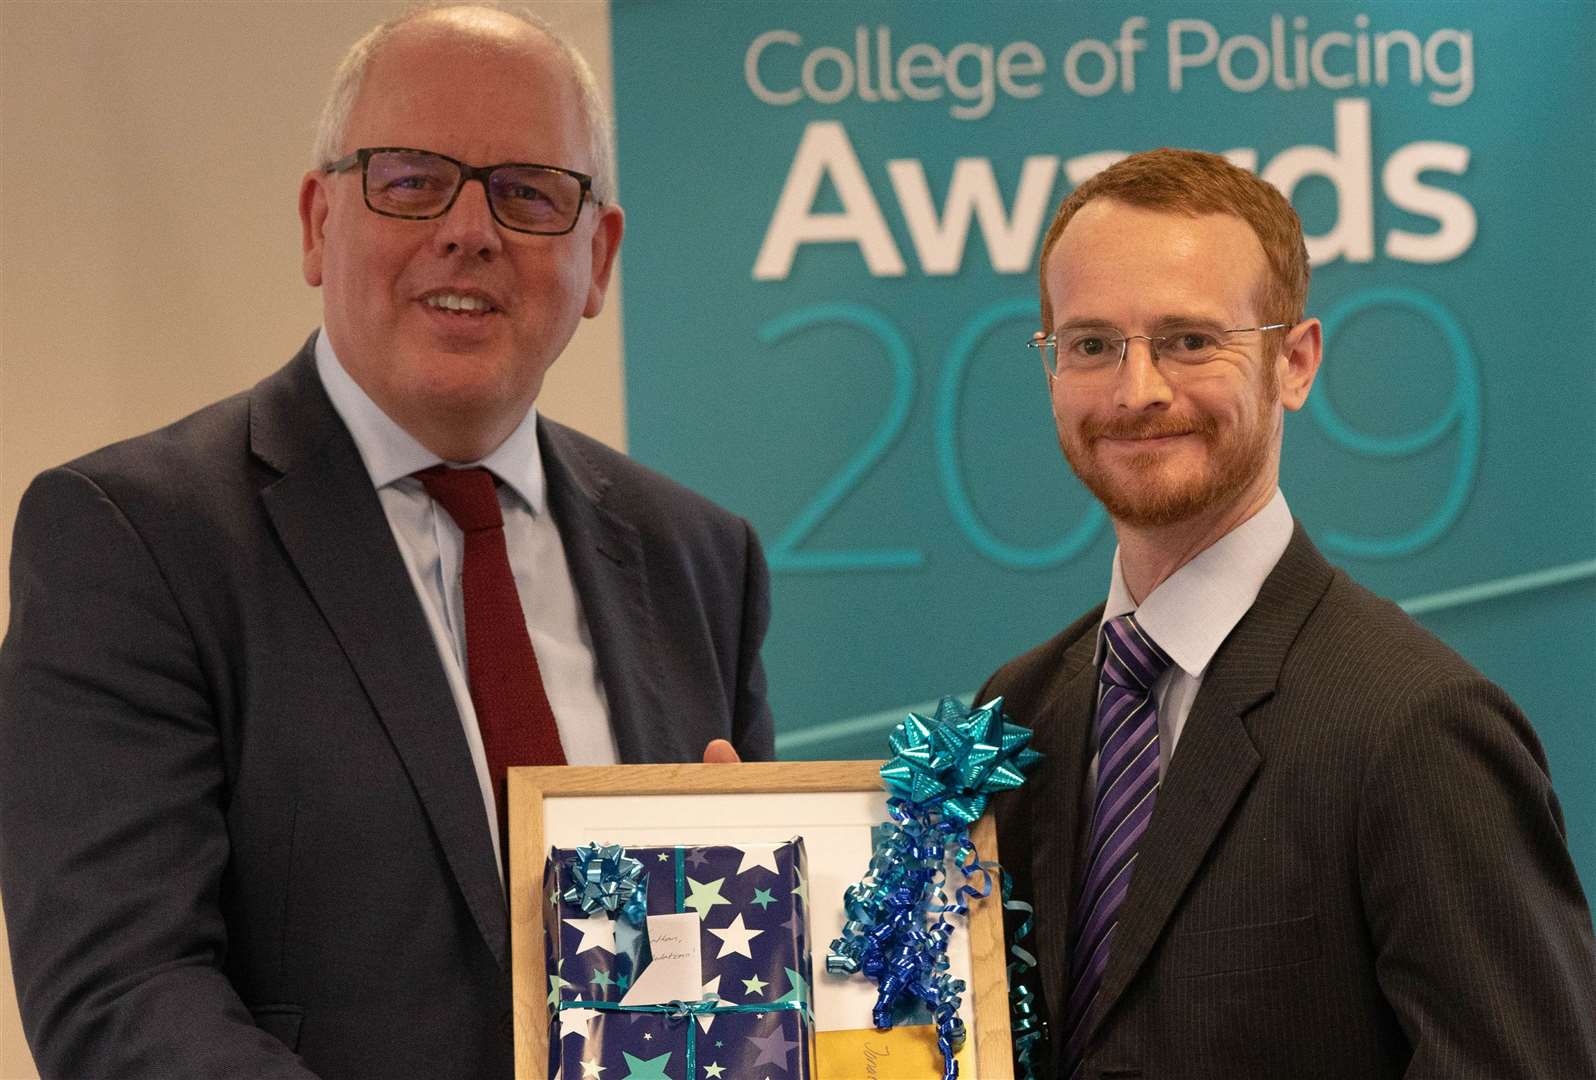 College of Policing CEO Mike Cunningham (left) giving Special Inspector Jonathan Townsend (right) his award.